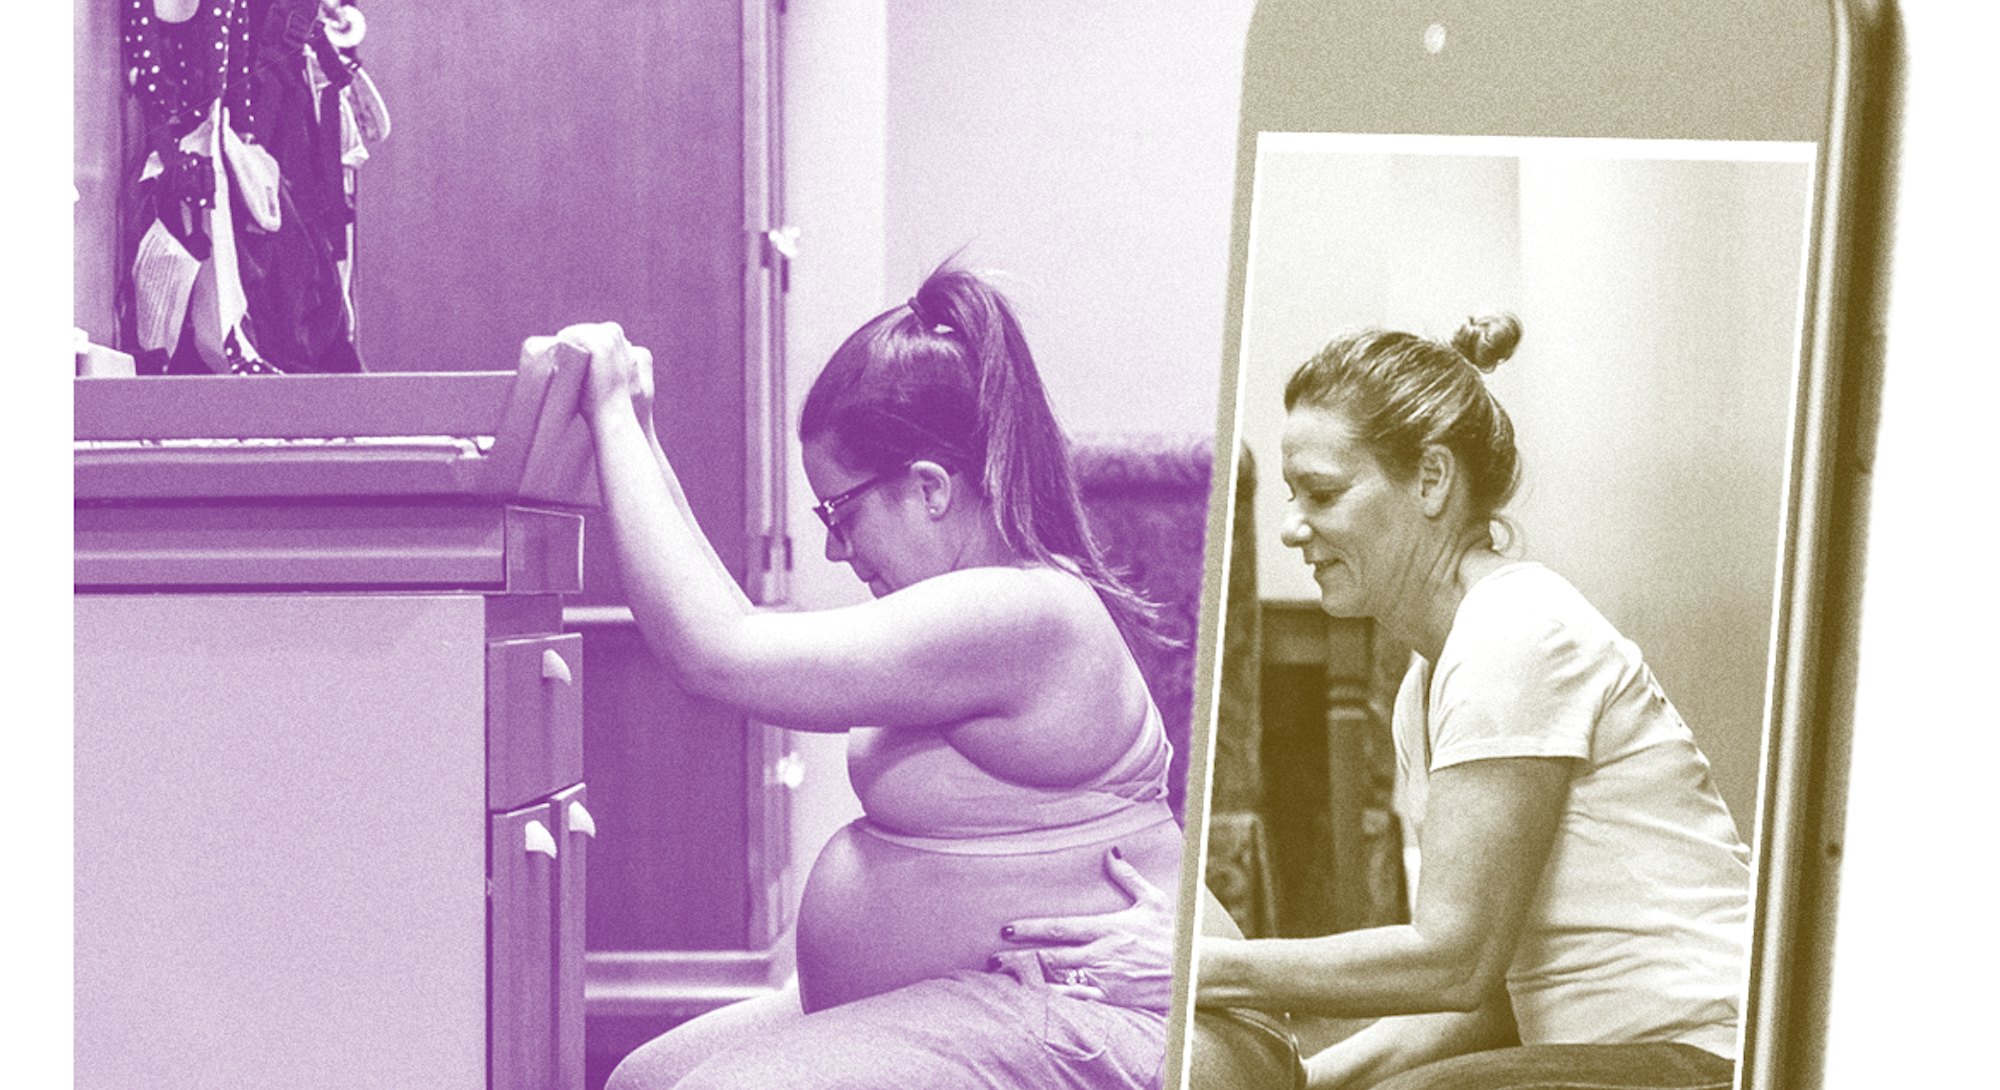 Woman squats during birth with support person behind her